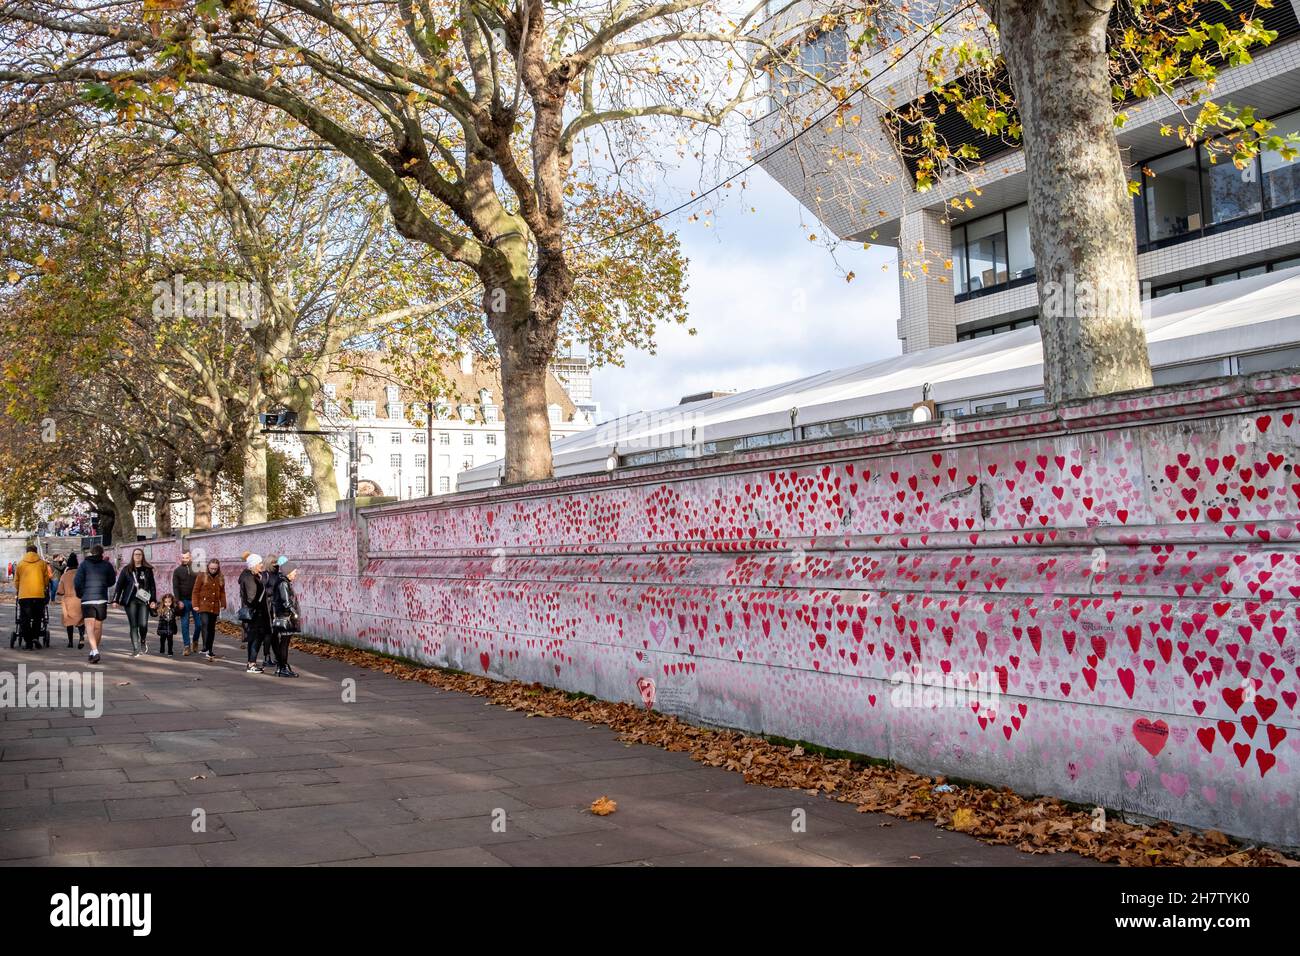 Waterloo London England UK, November 21 2021, Commemorate National Covid Memorial Wall Painted By Volunteers In Memory Of Covid Victims Who Lost Their Stock Photo